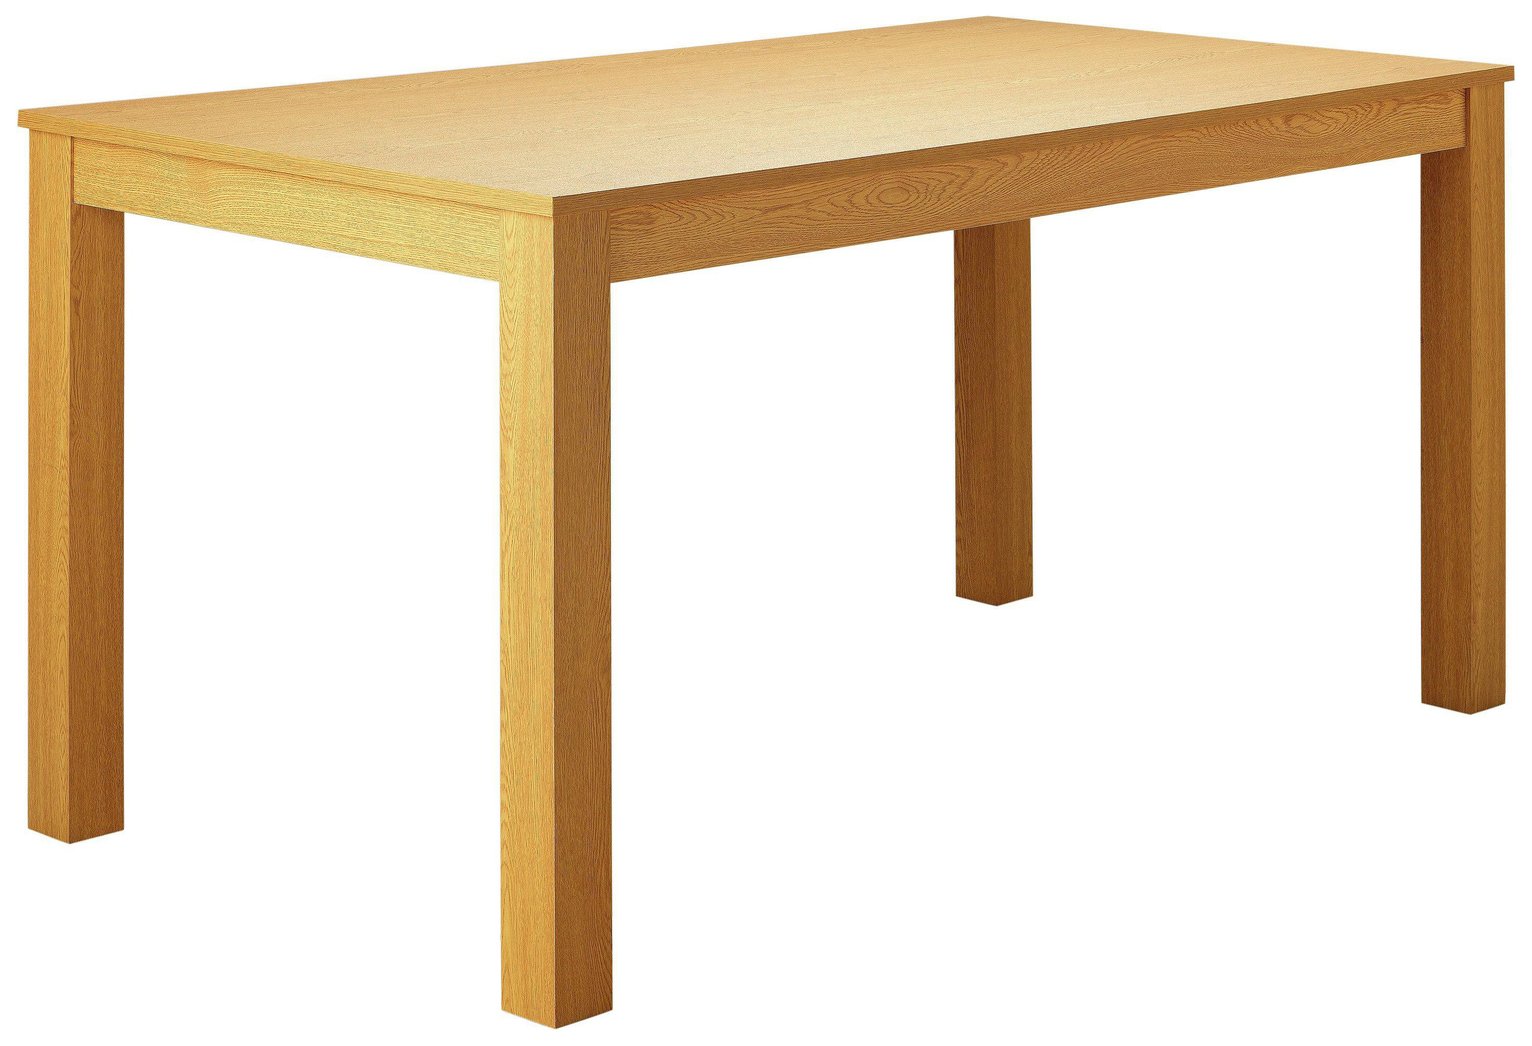 Argos Home Wood Effect 6 Seater Dining Table - Oak Effect